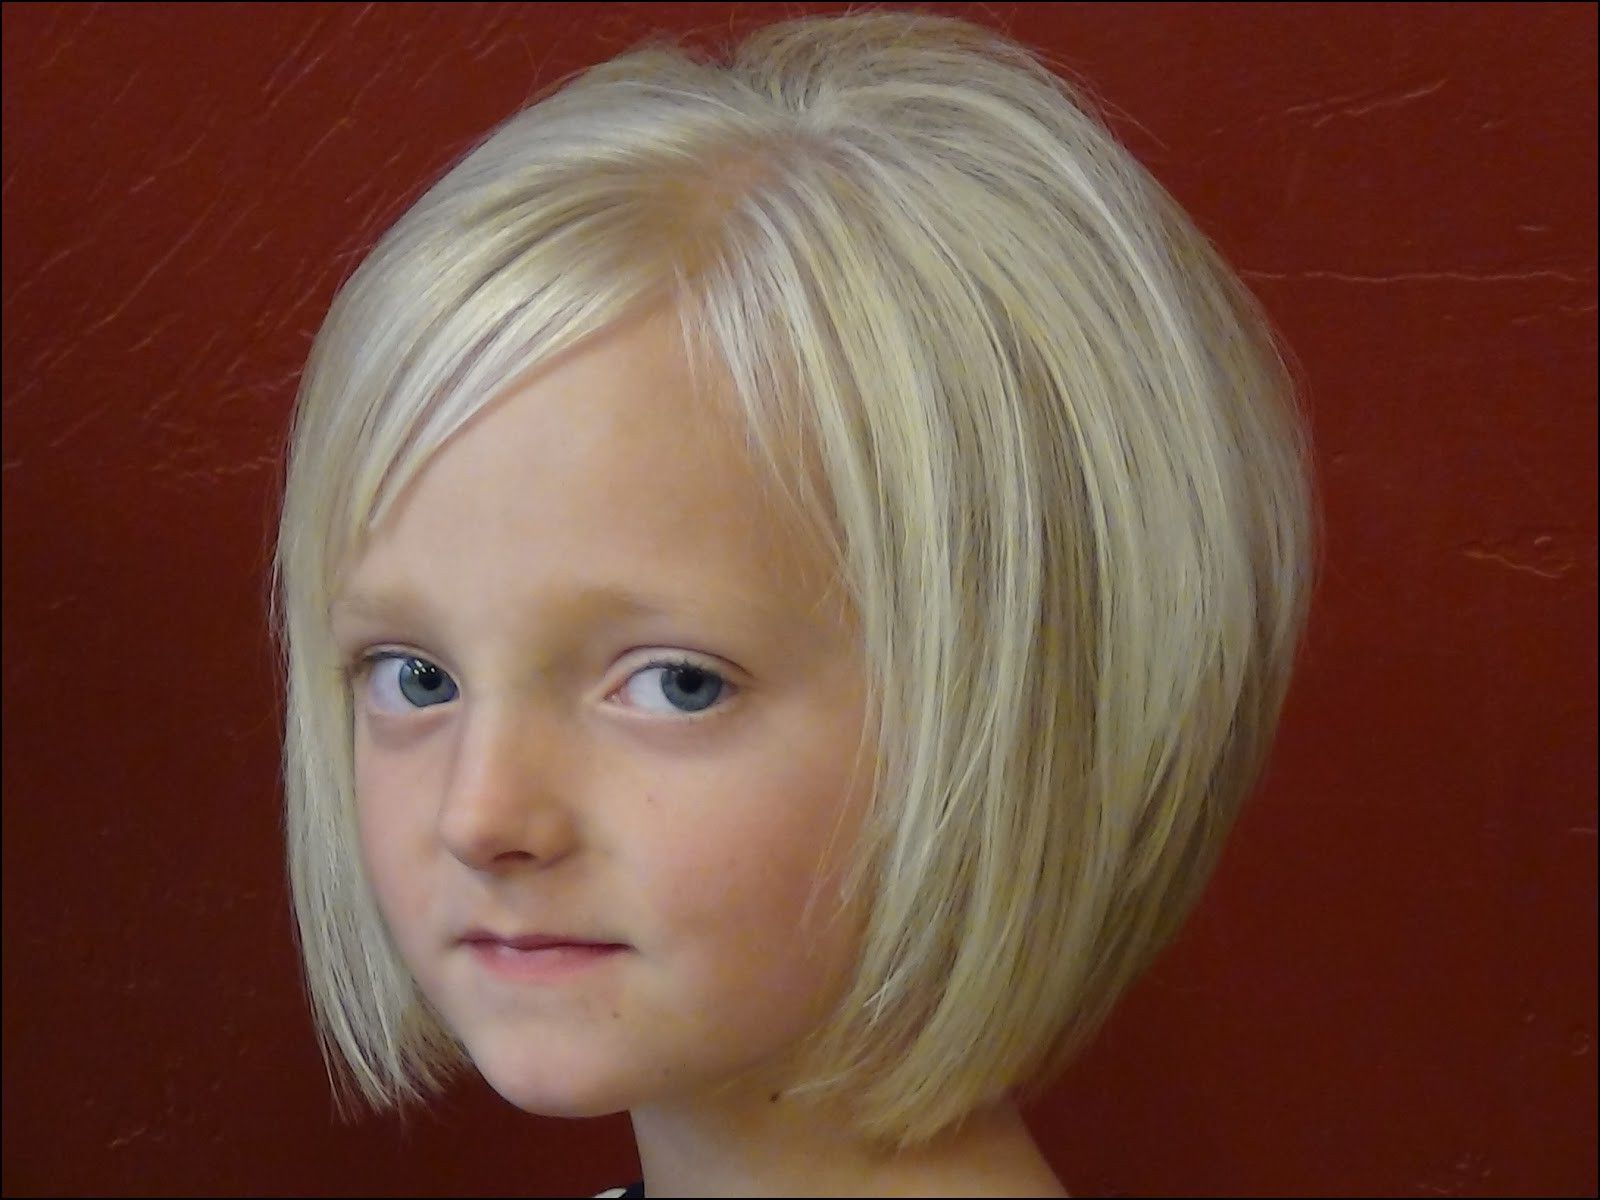 Kid Girl Short Haircuts | Kid Hair | Pinterest | Girls Short For Short Hairstyles For Young Girls (View 15 of 25)